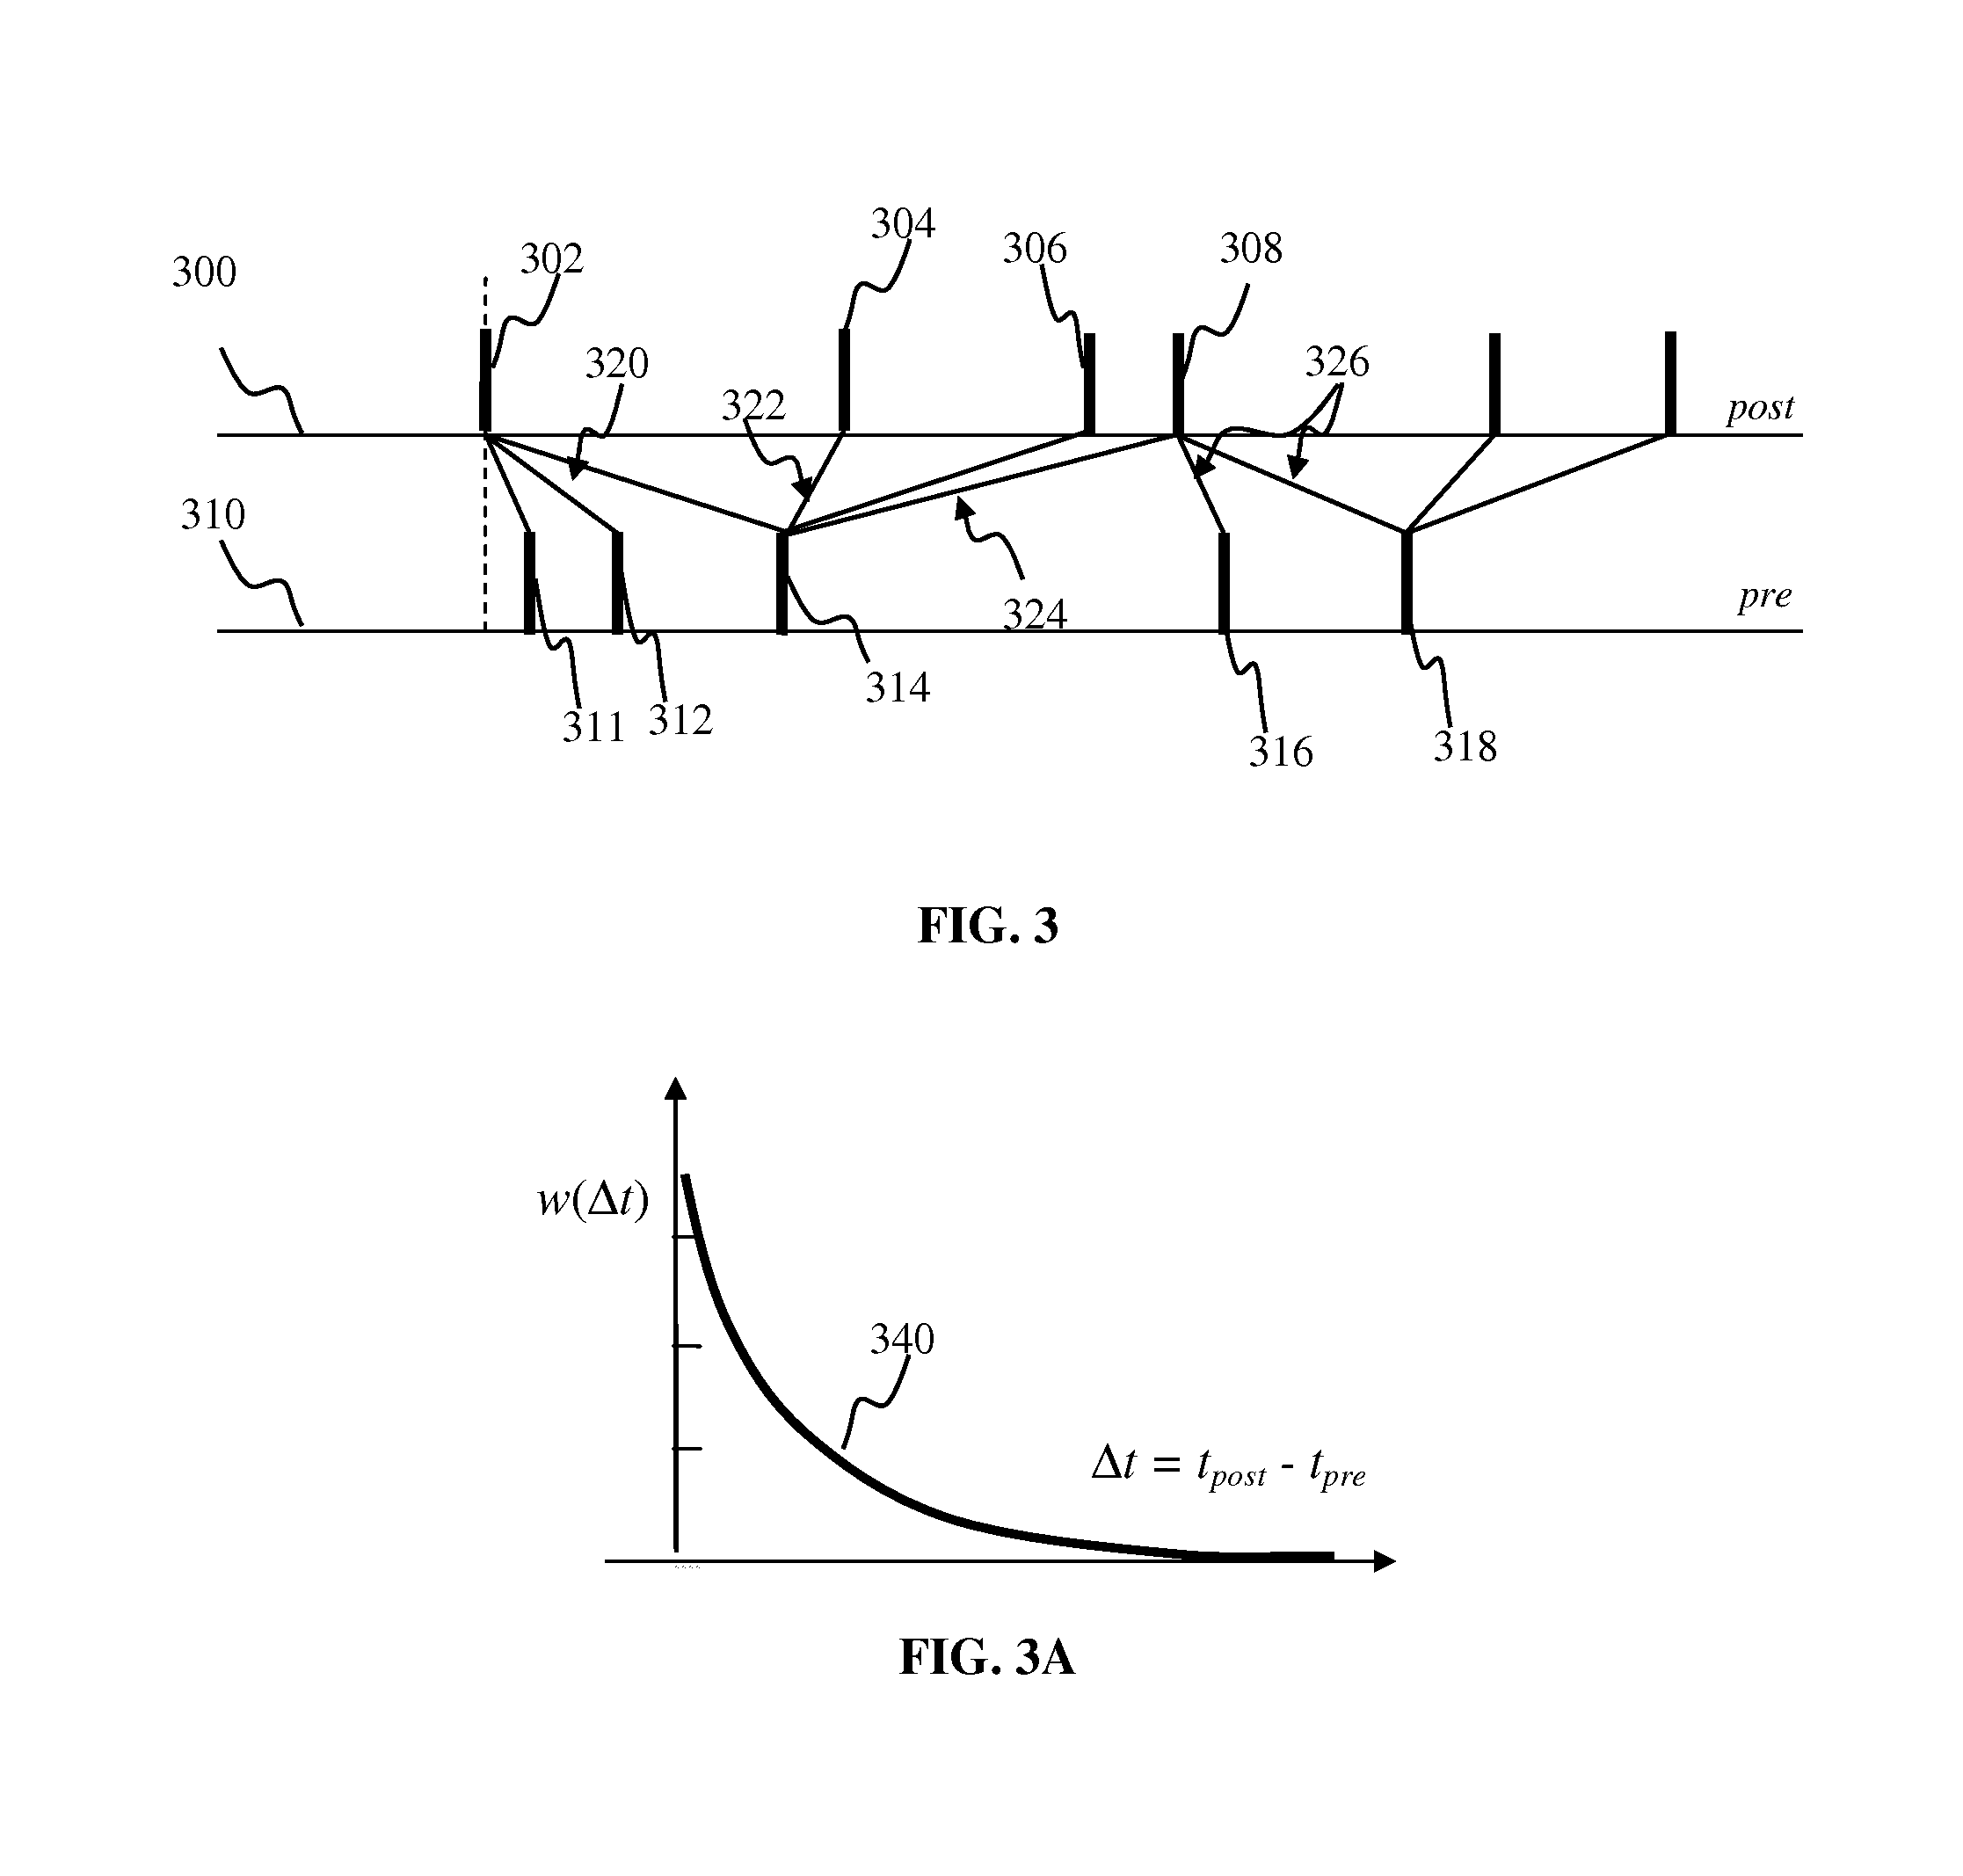 Spiking neuron network adaptive control apparatus and methods